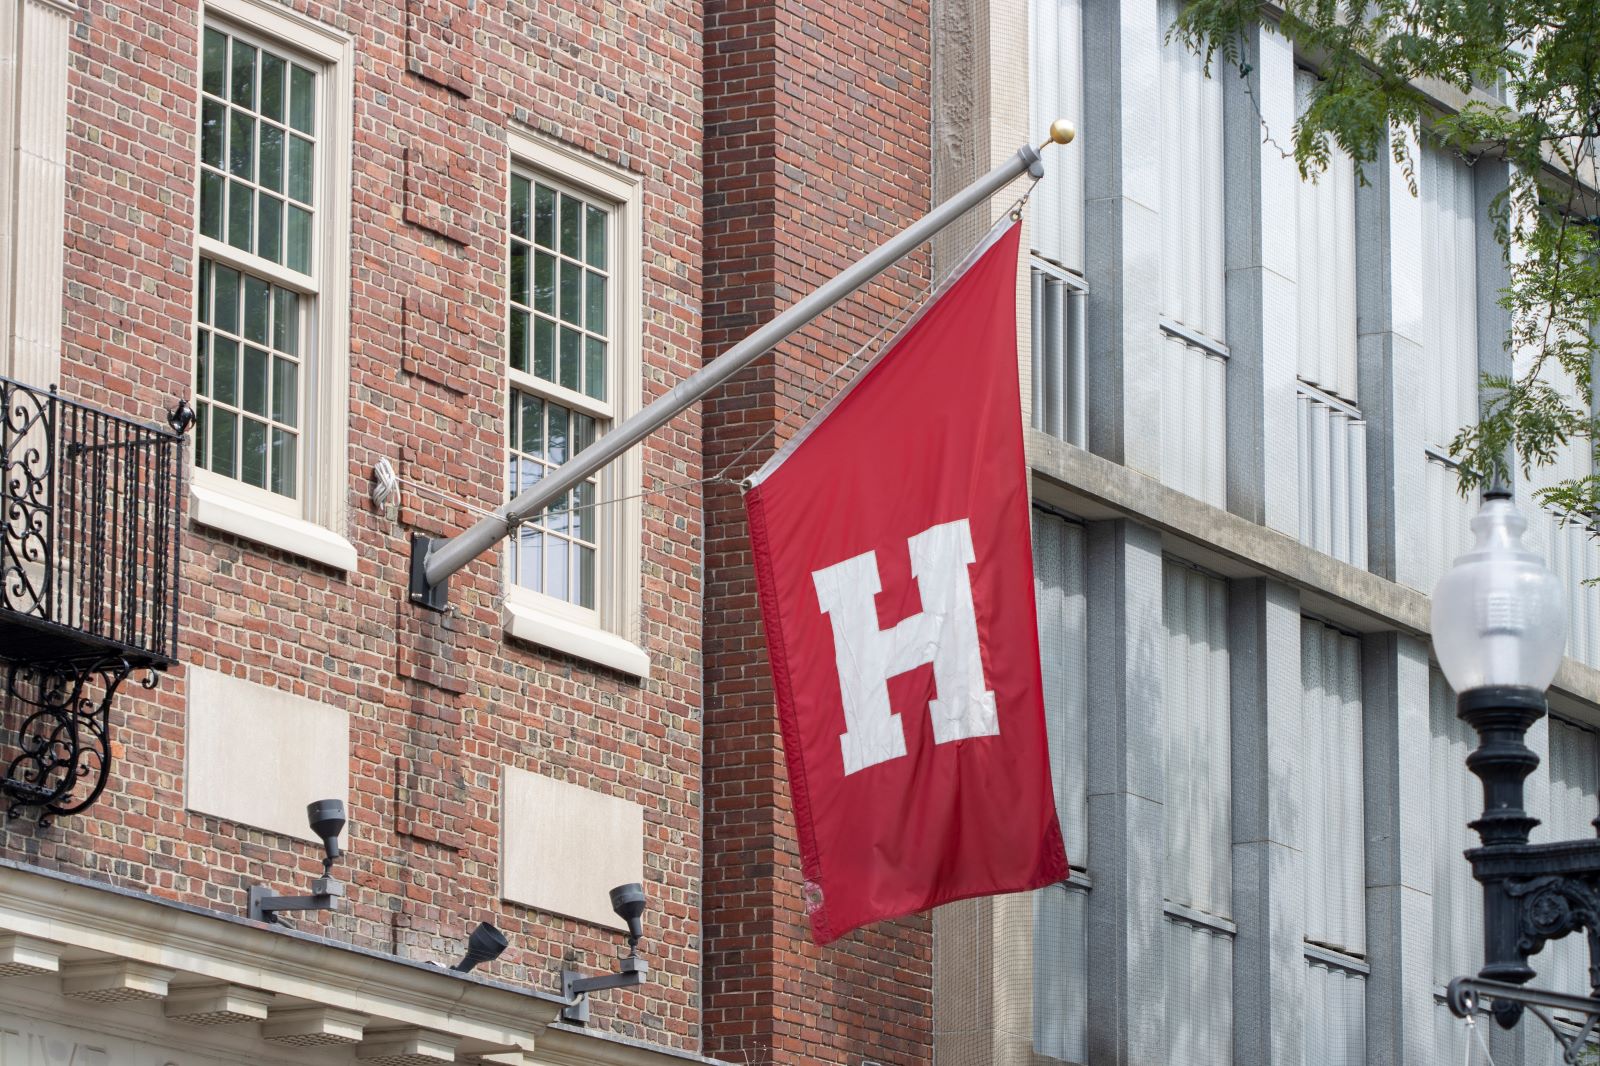 <p class="wp-caption-text">Image Credit: Shutterstock / Tada Images</p>  <p>Tour Harvard University in nearby Cambridge. Its history, architecture, and the significant role it has played in American education are captivating.</p>